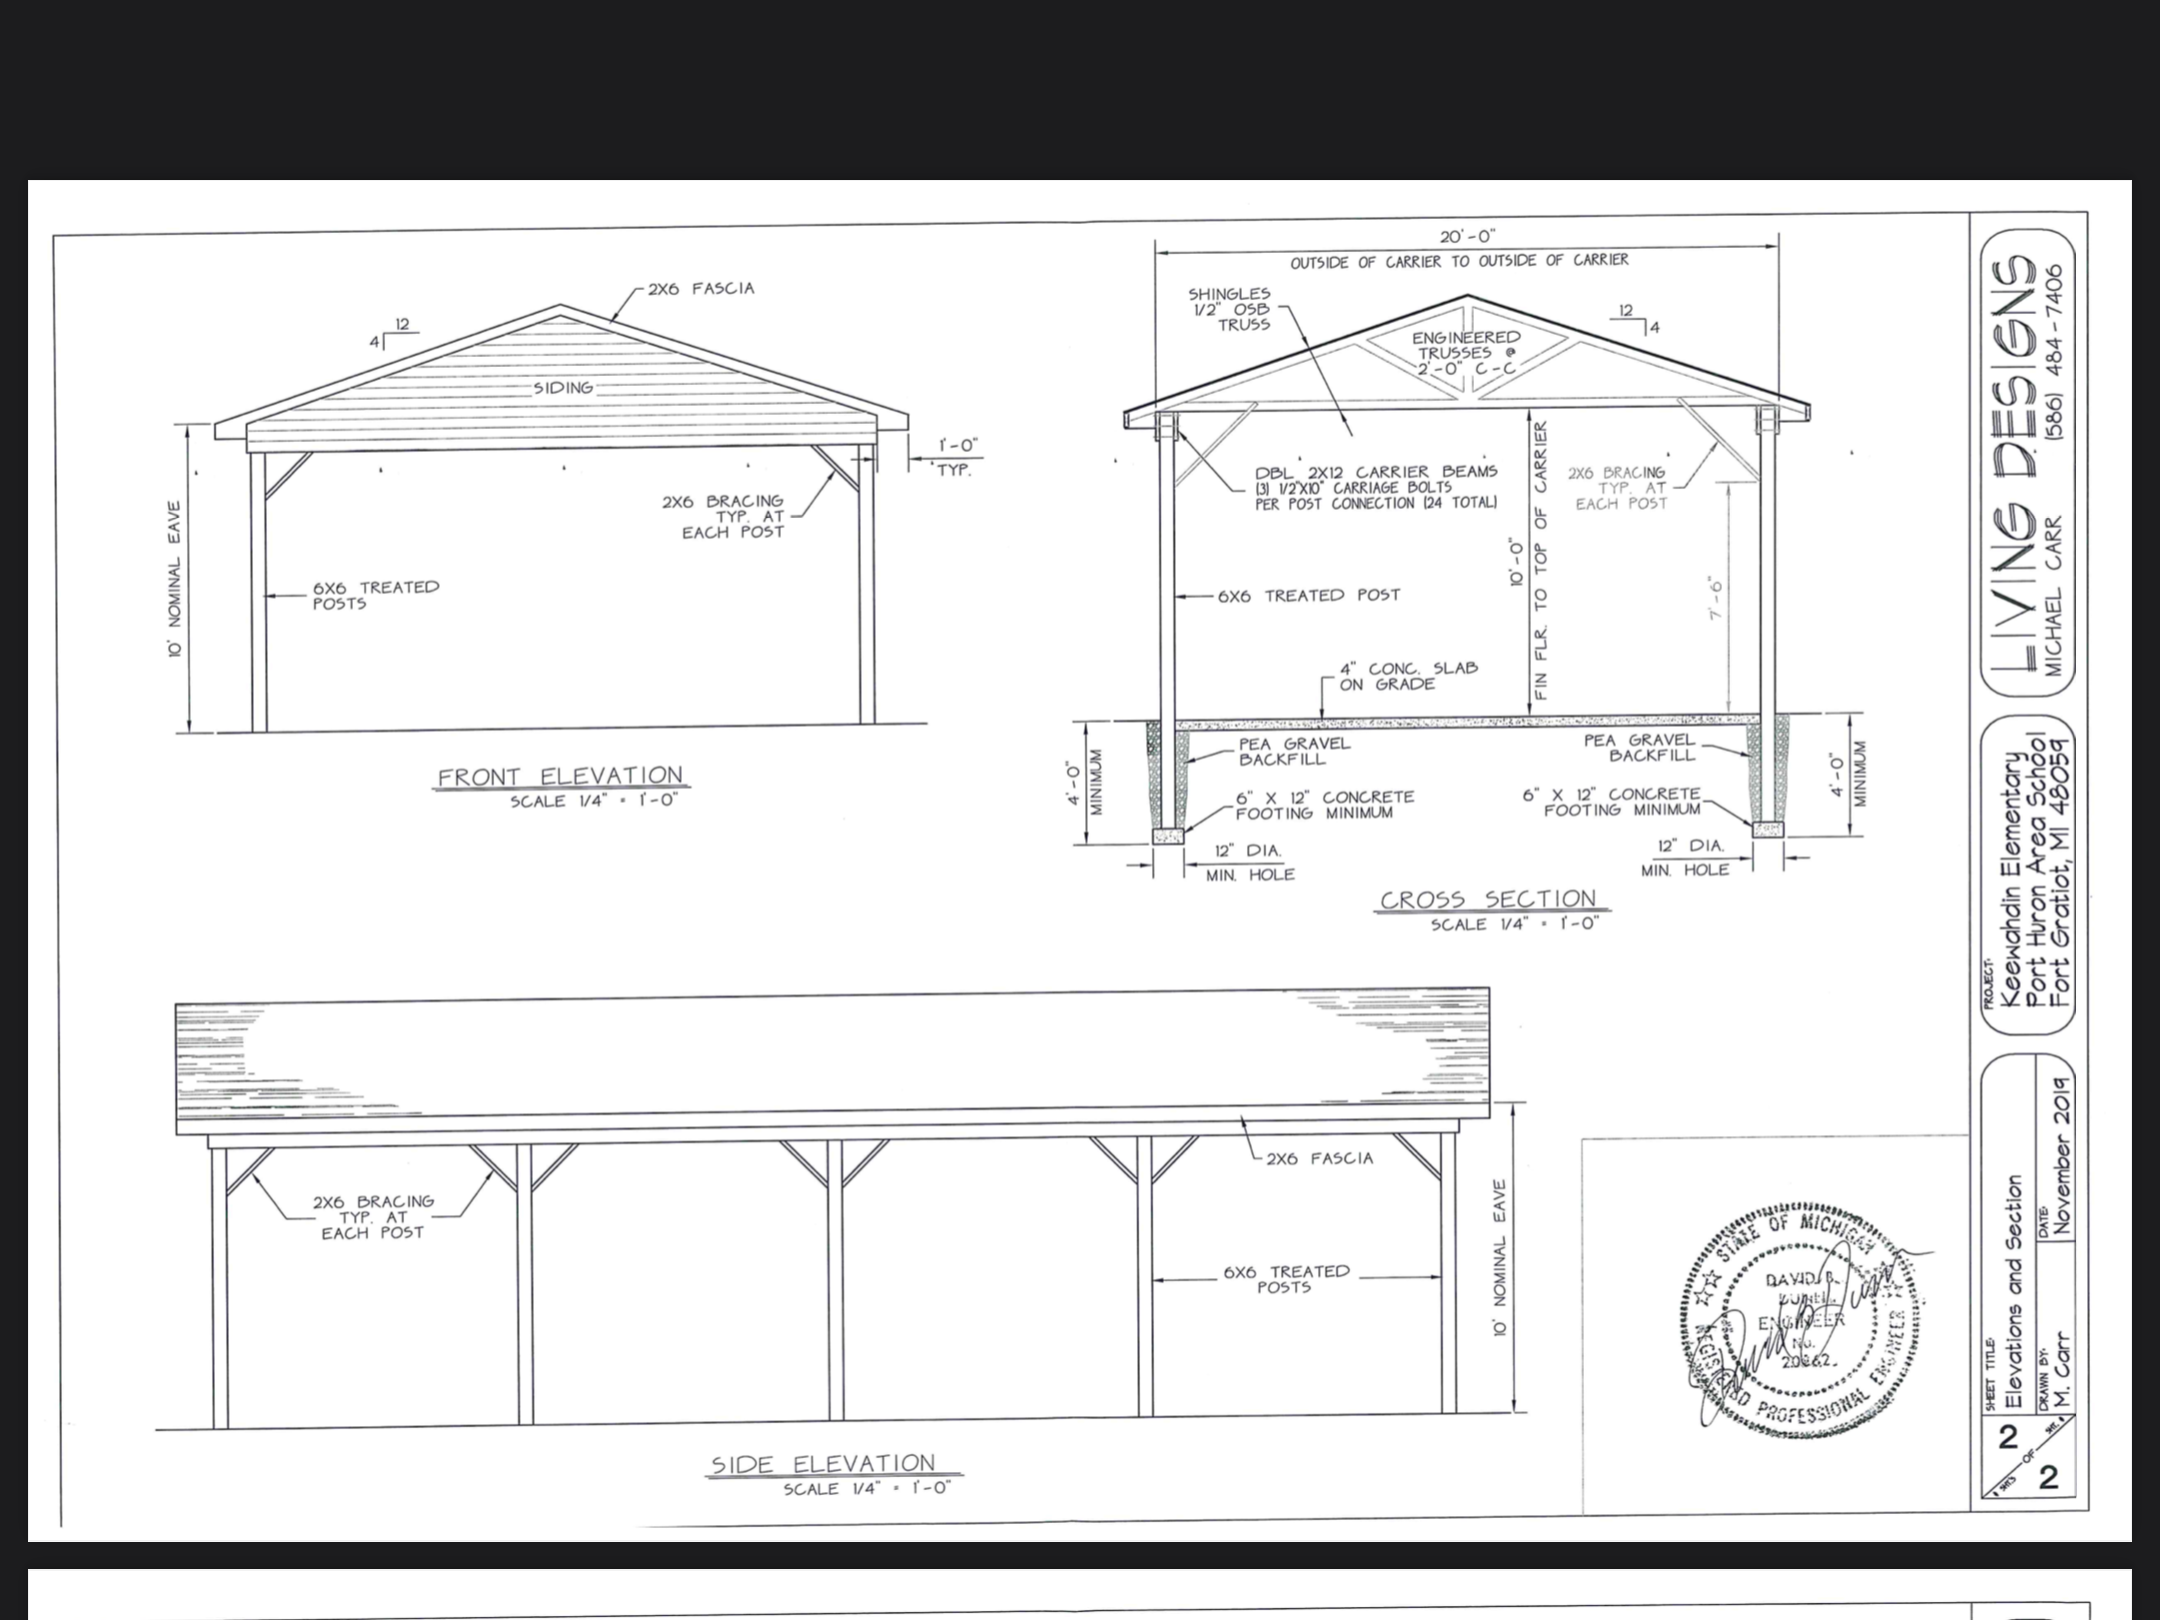 Blueprints for the outdoor learning center